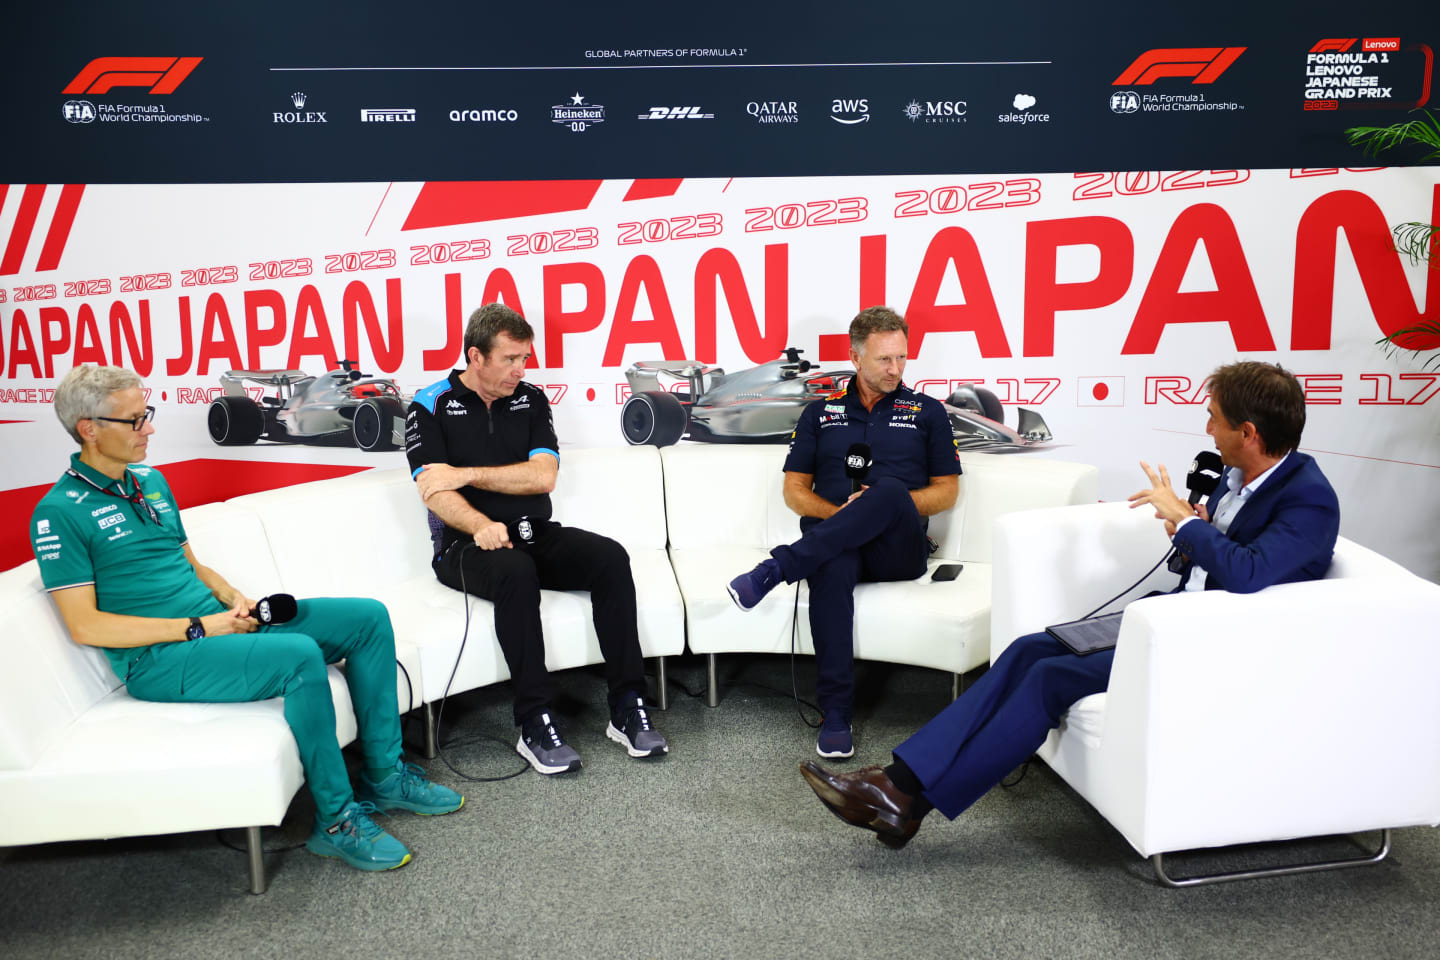 SUZUKA, JAPAN - SEPTEMBER 22: Mike Krack, Team Principal of the Aston Martin F1 Team, Bruno Famin, Interim Team Principal of Alpine F1 and Red Bull Racing Team Principal Christian Horner attend the Team Principals Press Conference during practice ahead of the F1 Grand Prix of Japan at Suzuka International Racing Course on September 22, 2023 in Suzuka, Japan. (Photo by Dan Istitene/Getty Images)